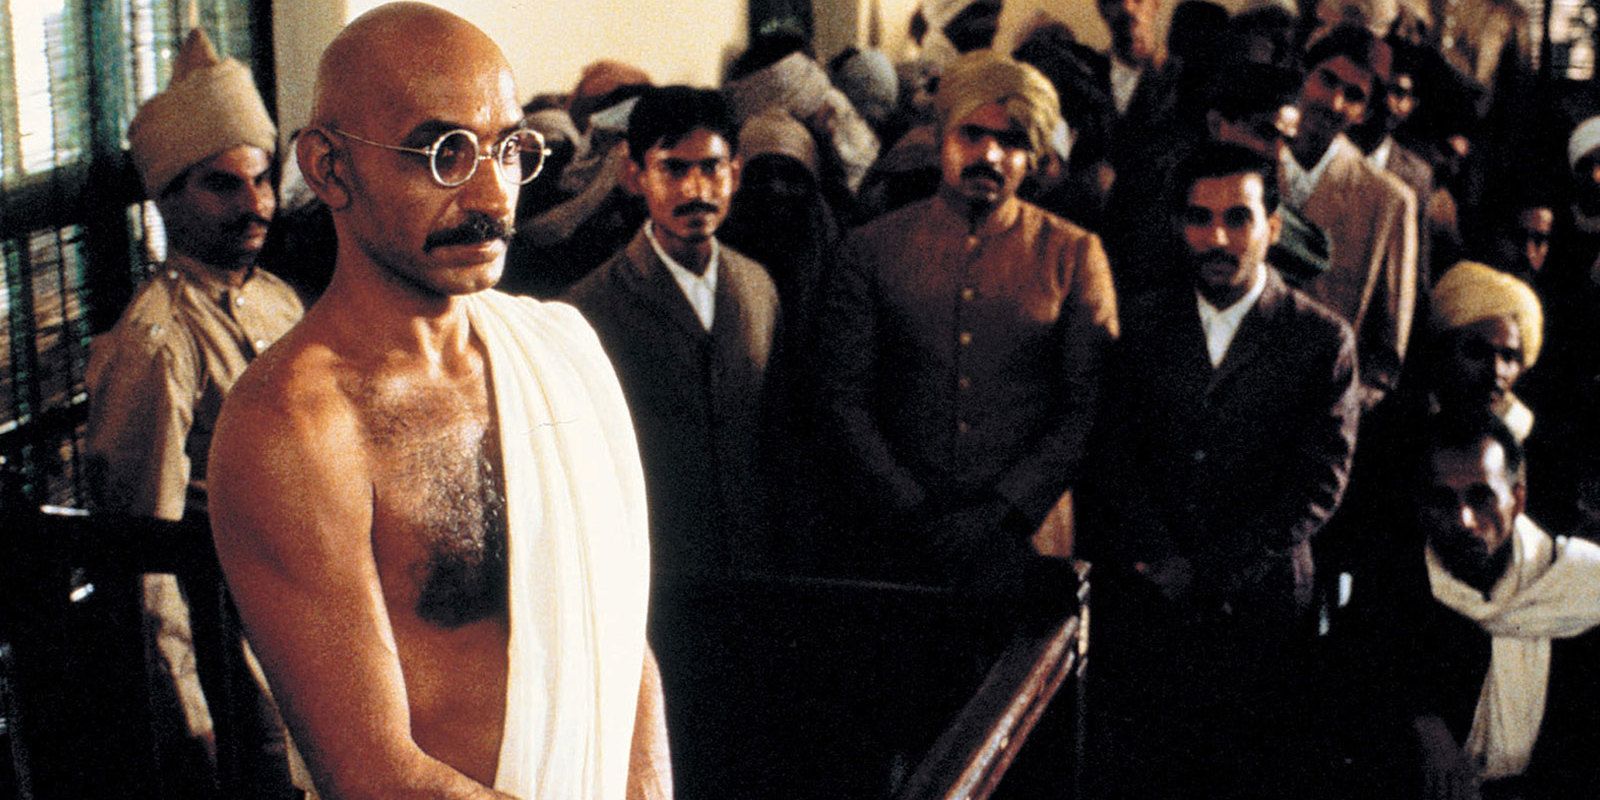 Gandhi stands in front of a group of Indians in Gandhi